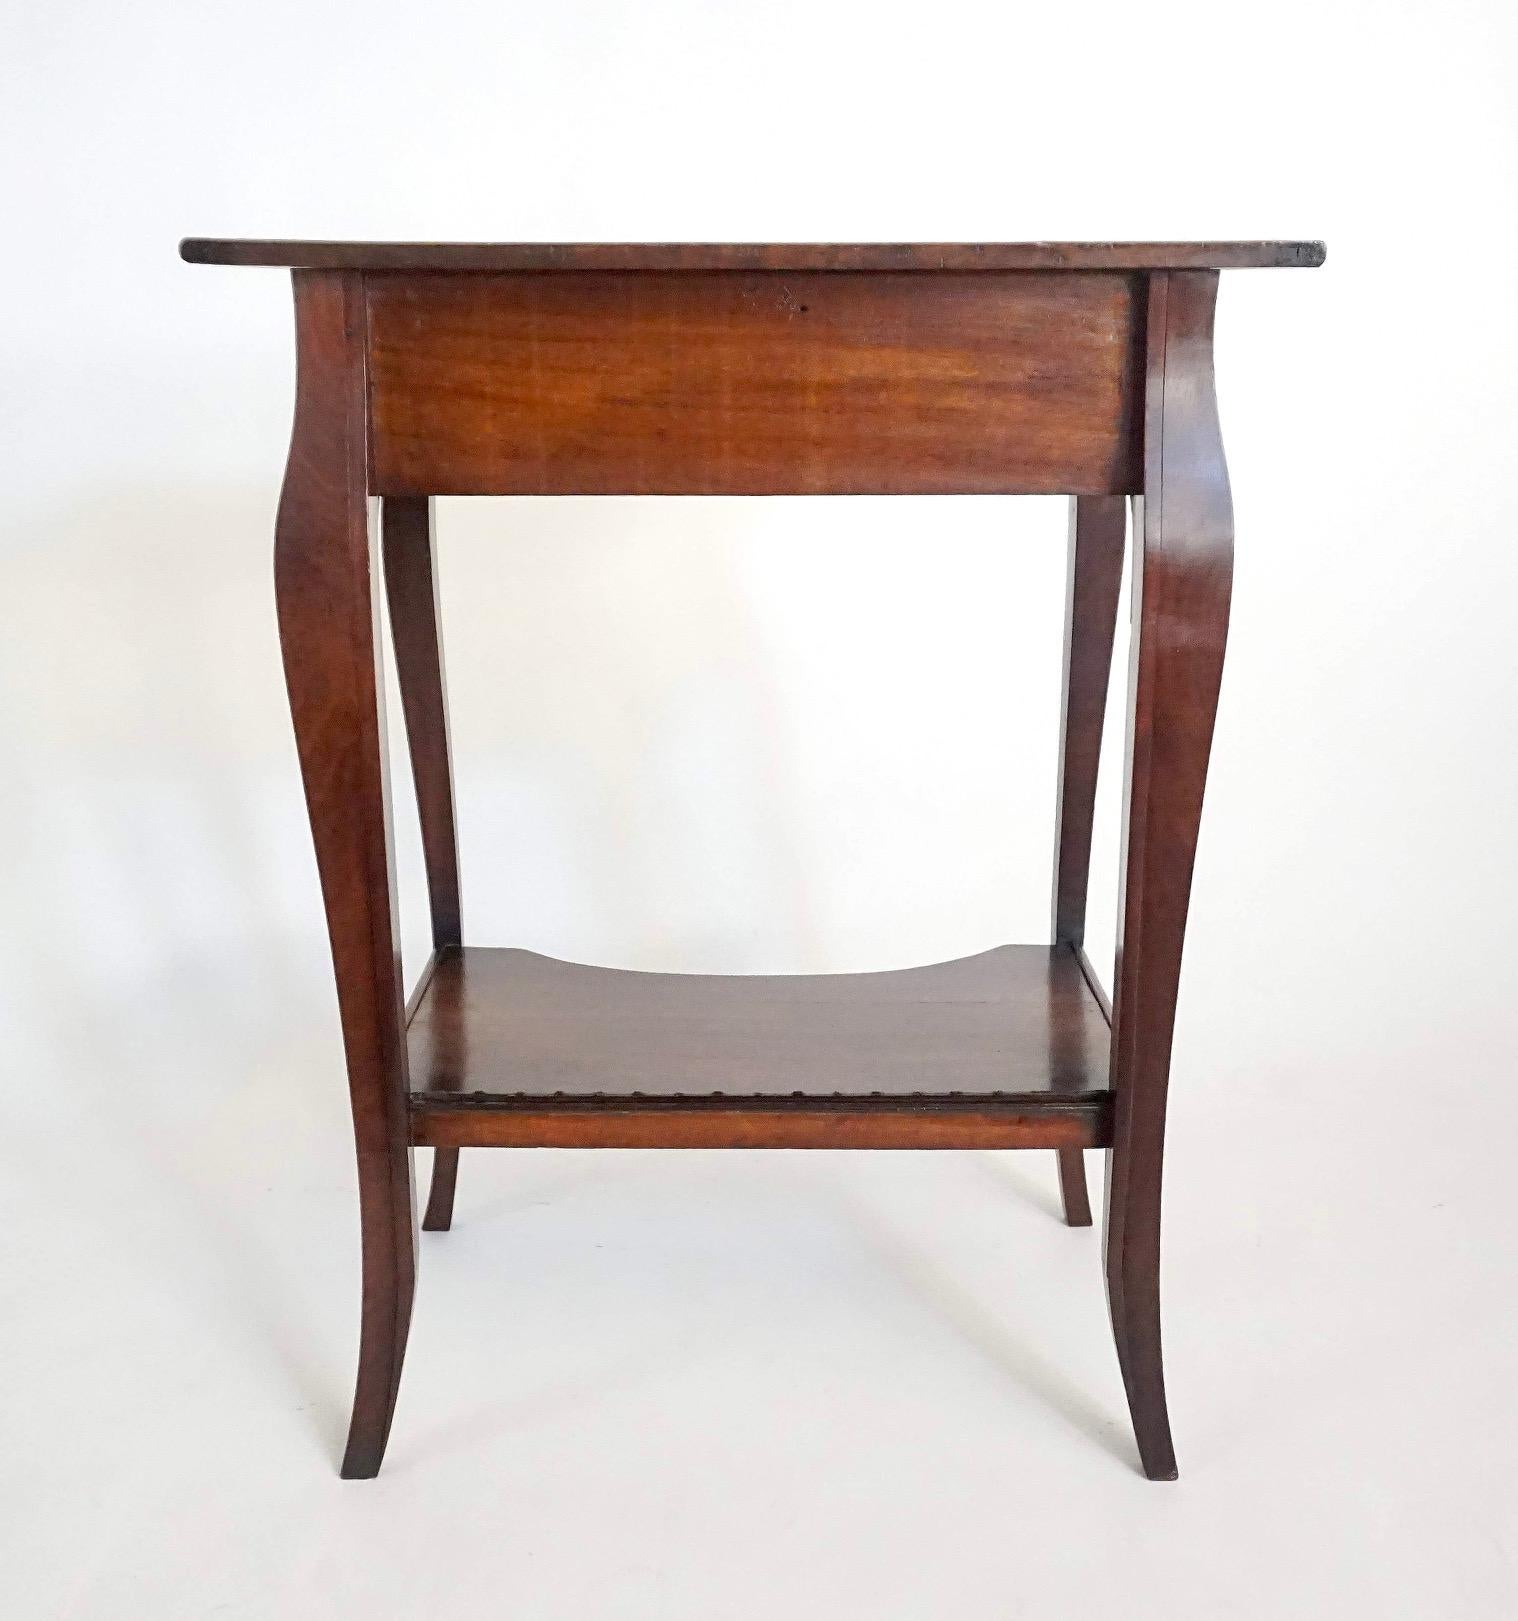 English George III Sabicu & Gonçalo Alves Work Table in the Manner of John Cobb For Sale 8